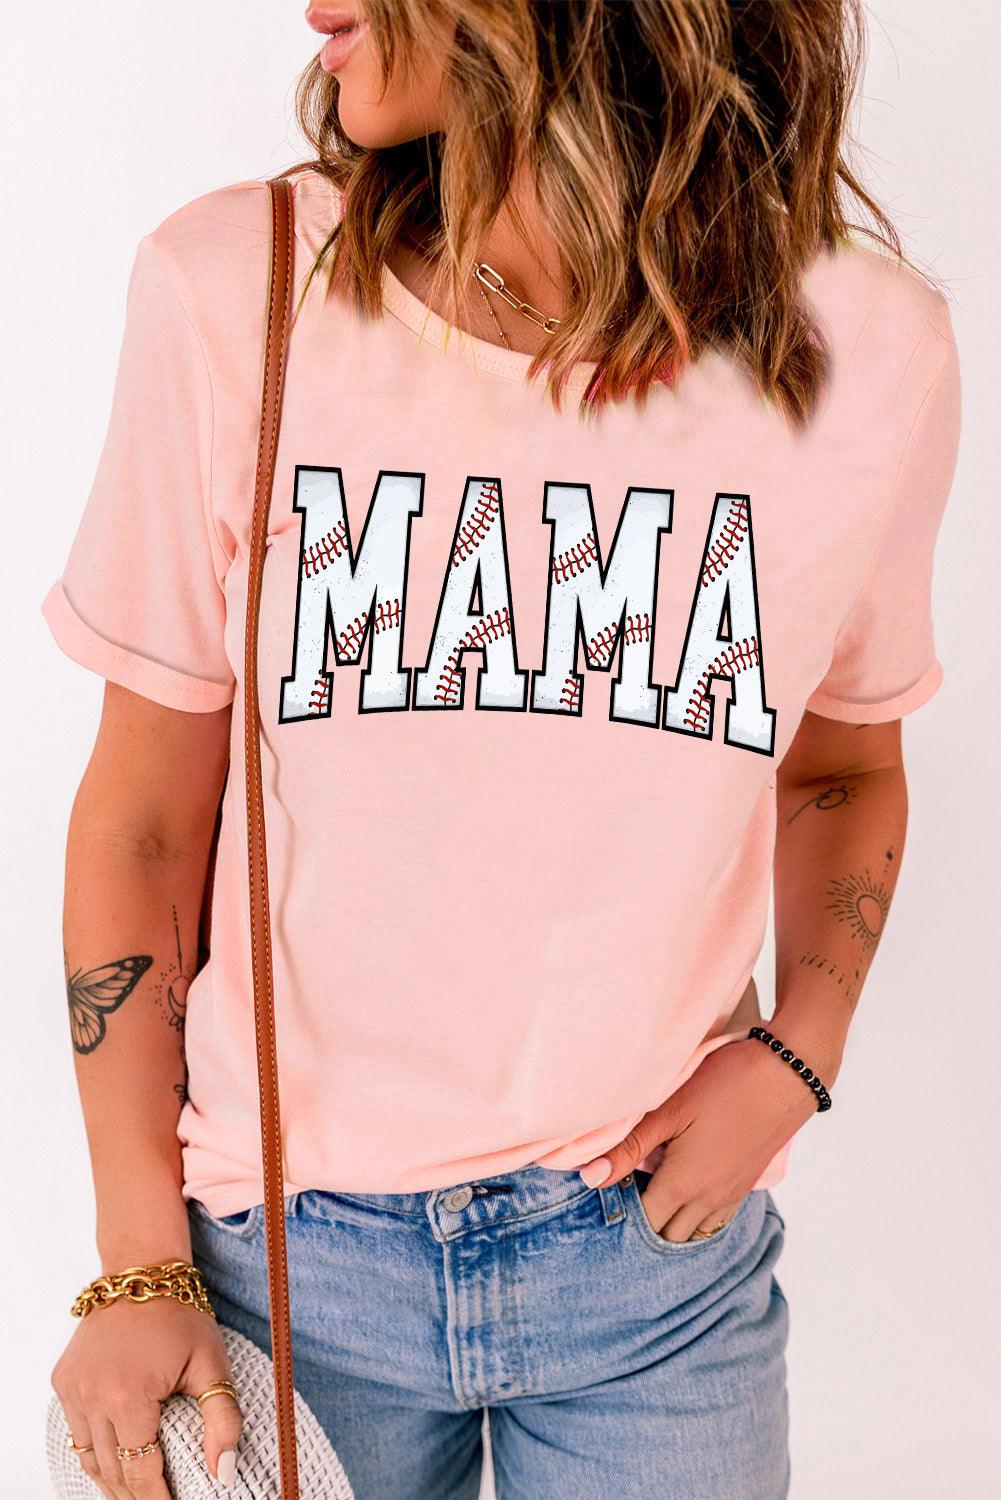 Pink Rugby MAMA Graphic Cuffed T-shirt - L & M Kee, LLC